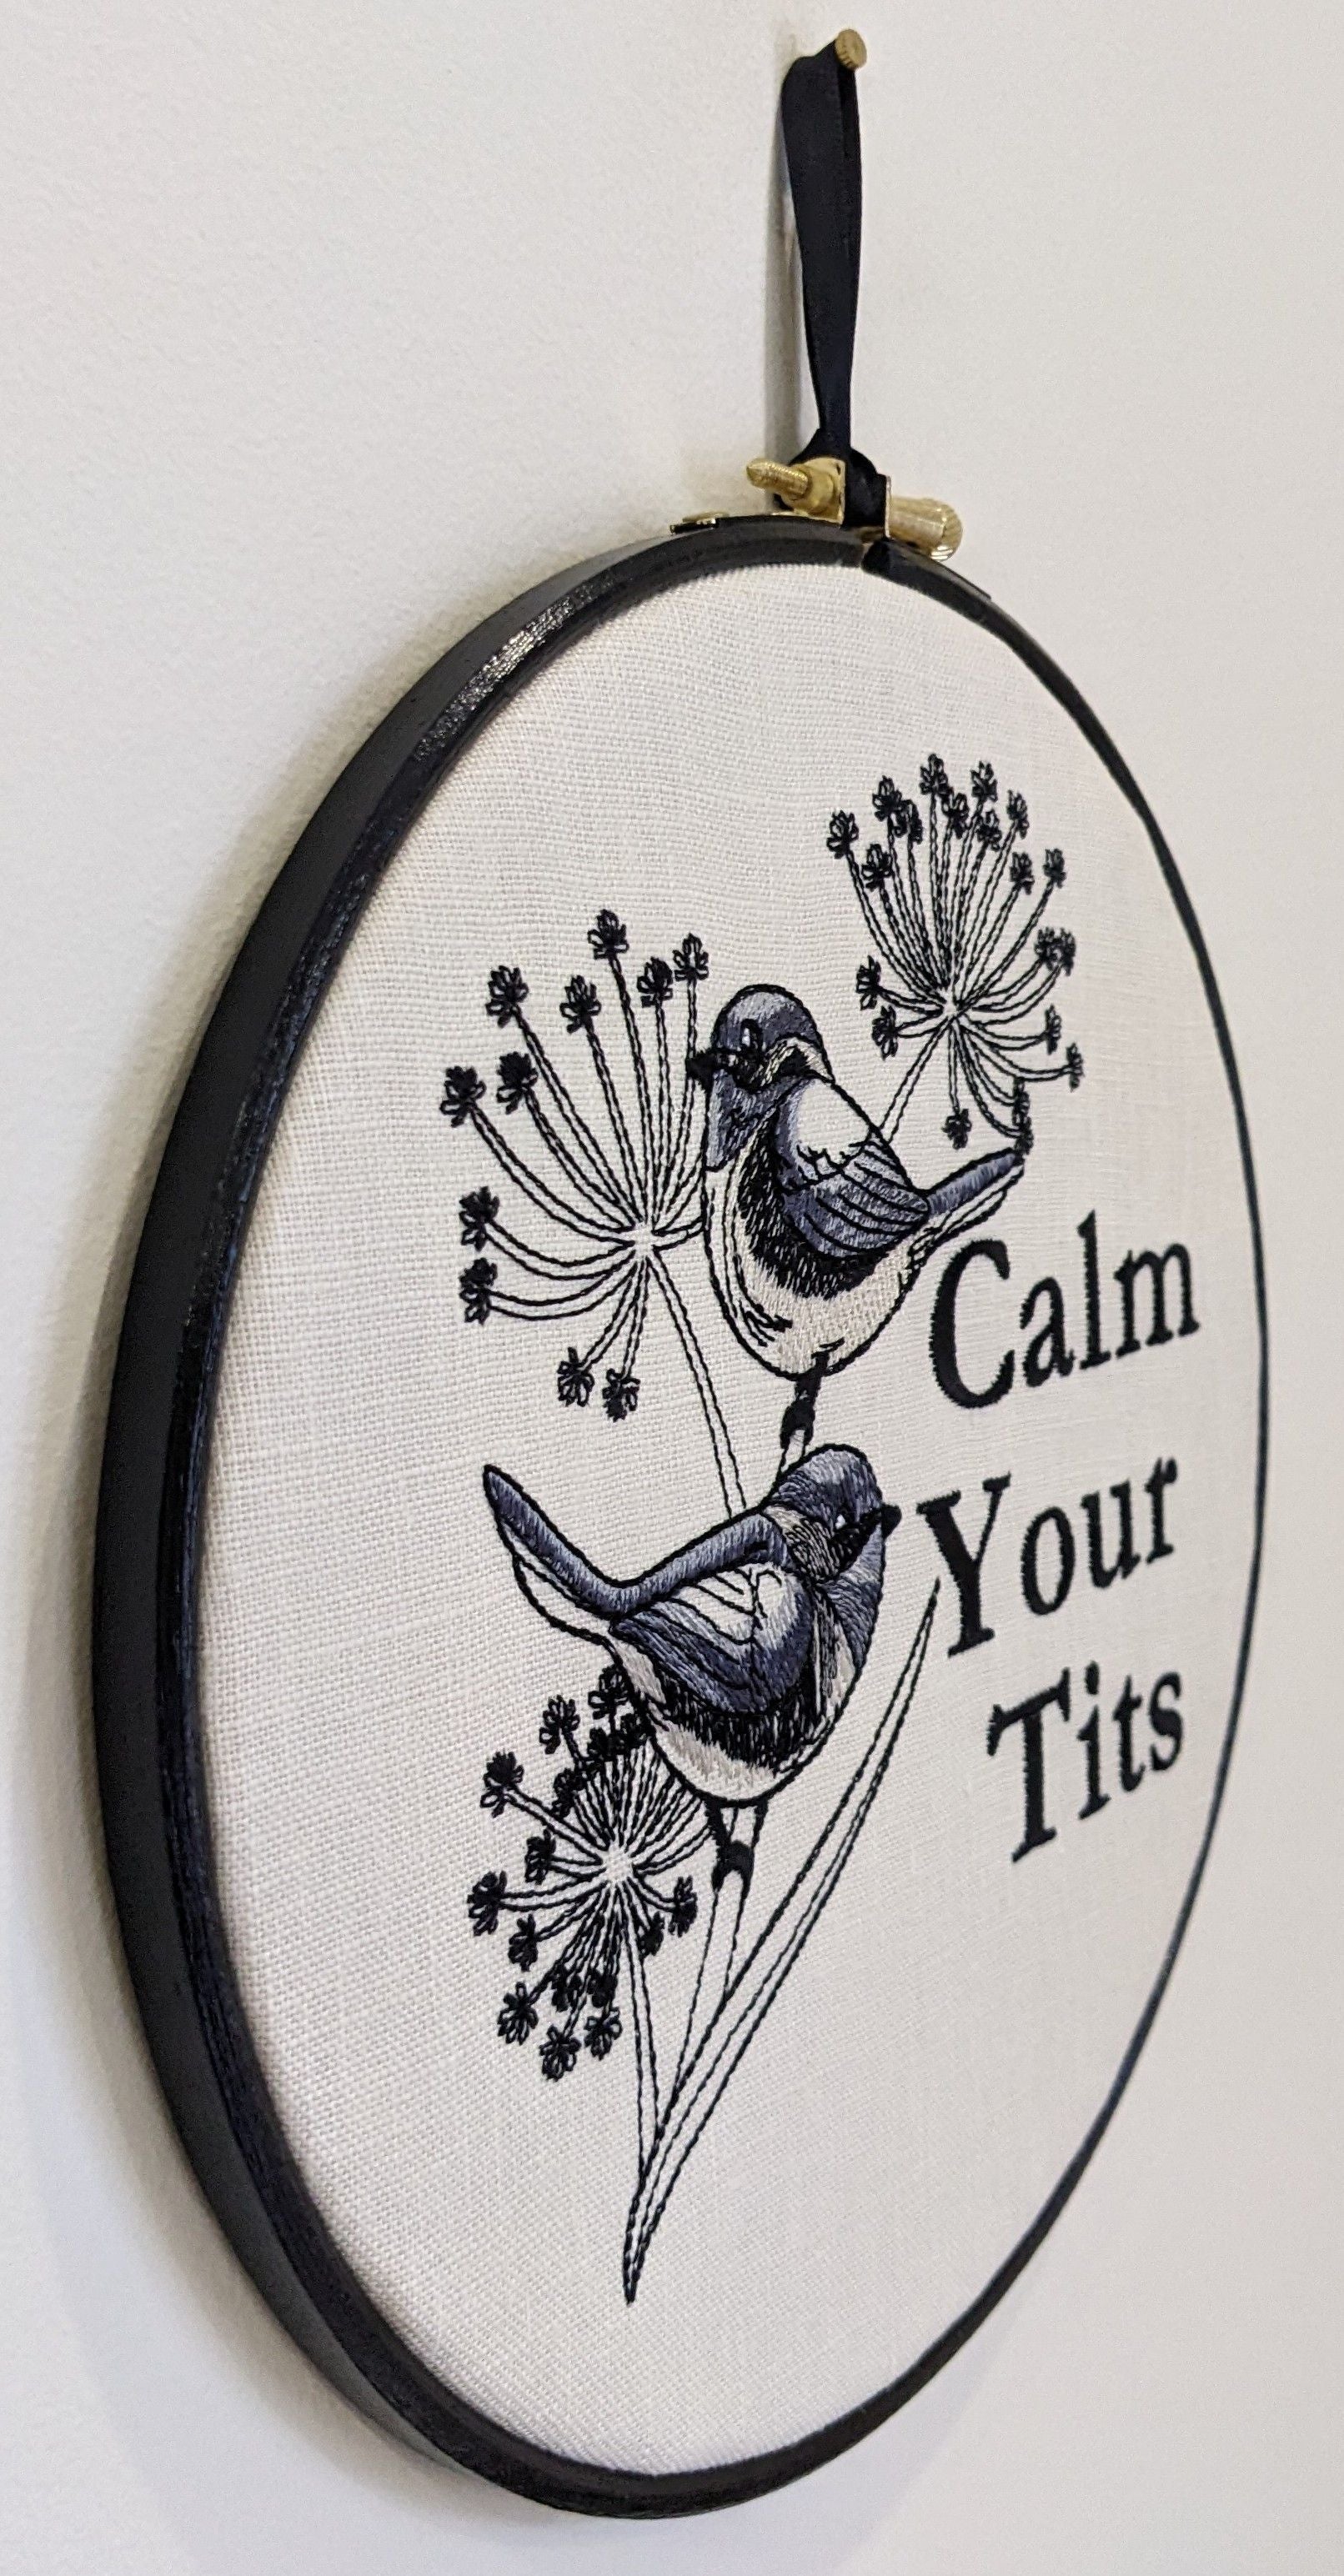 Calm your Blue-tits, Blue-tit machine embroidery 8" hoop art